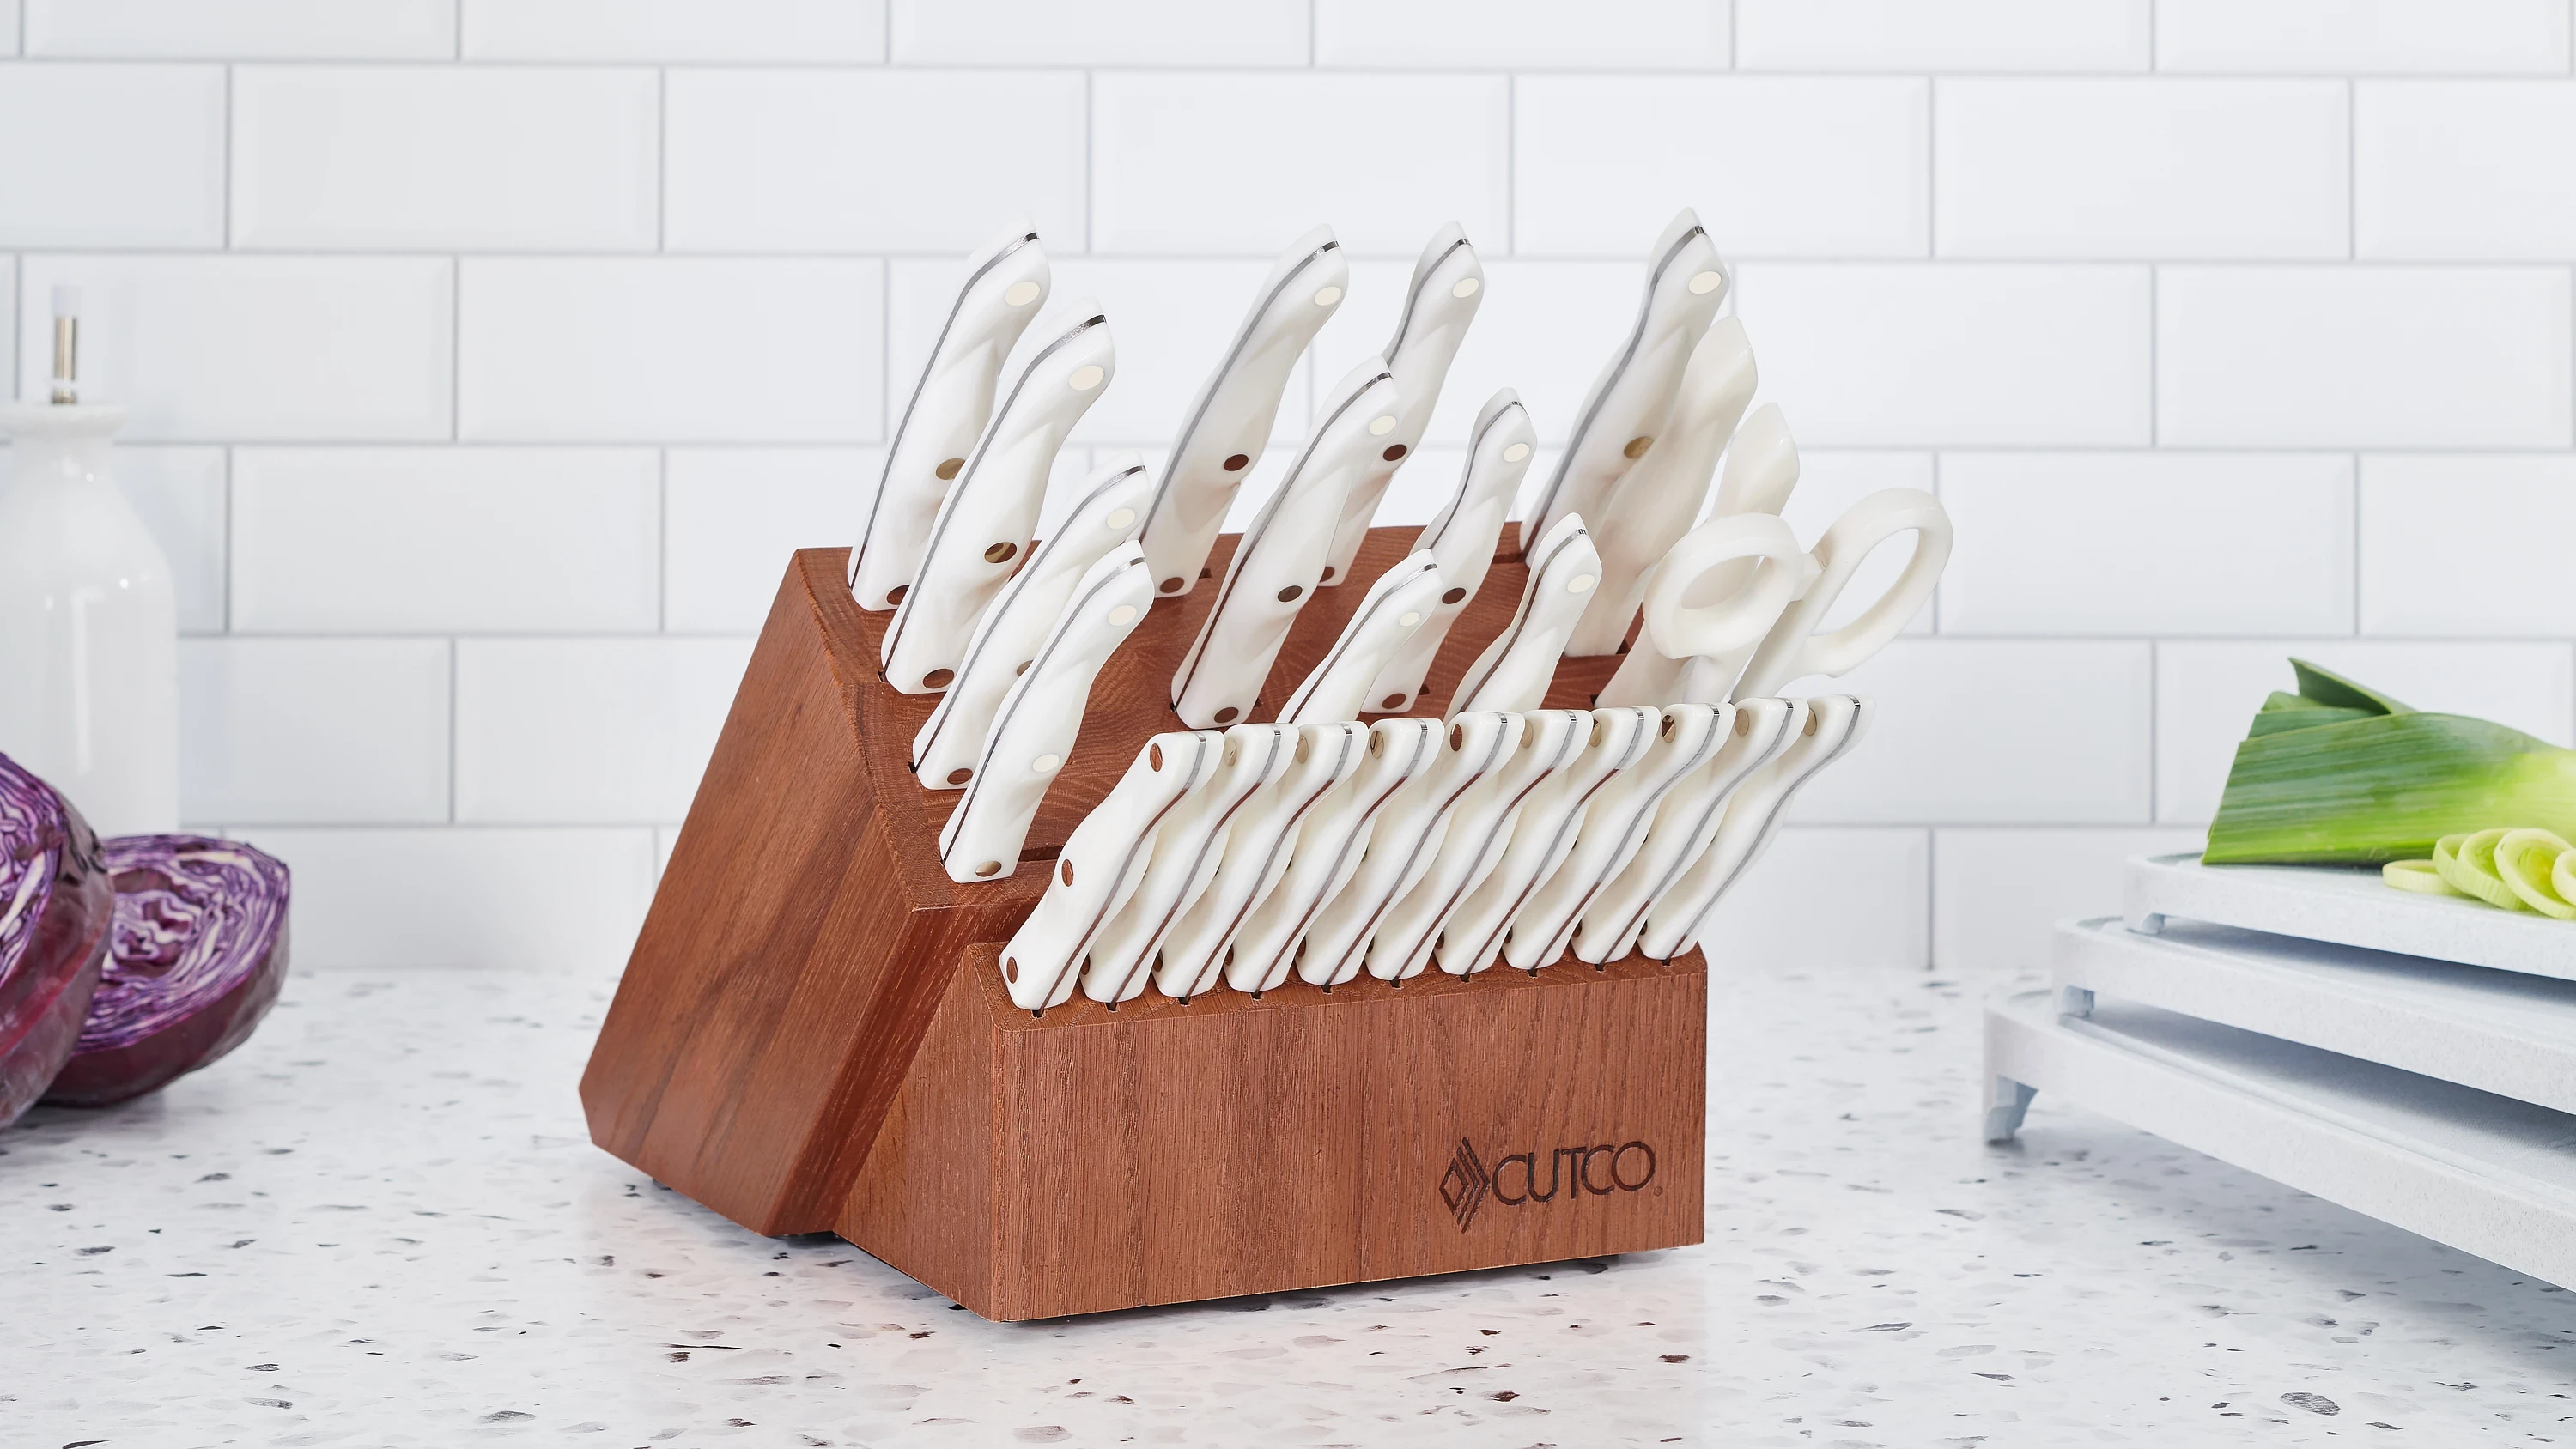 Ultimate Set with Steak Knives with Block | 37 Pieces | Knife Block Sets by  Cutco